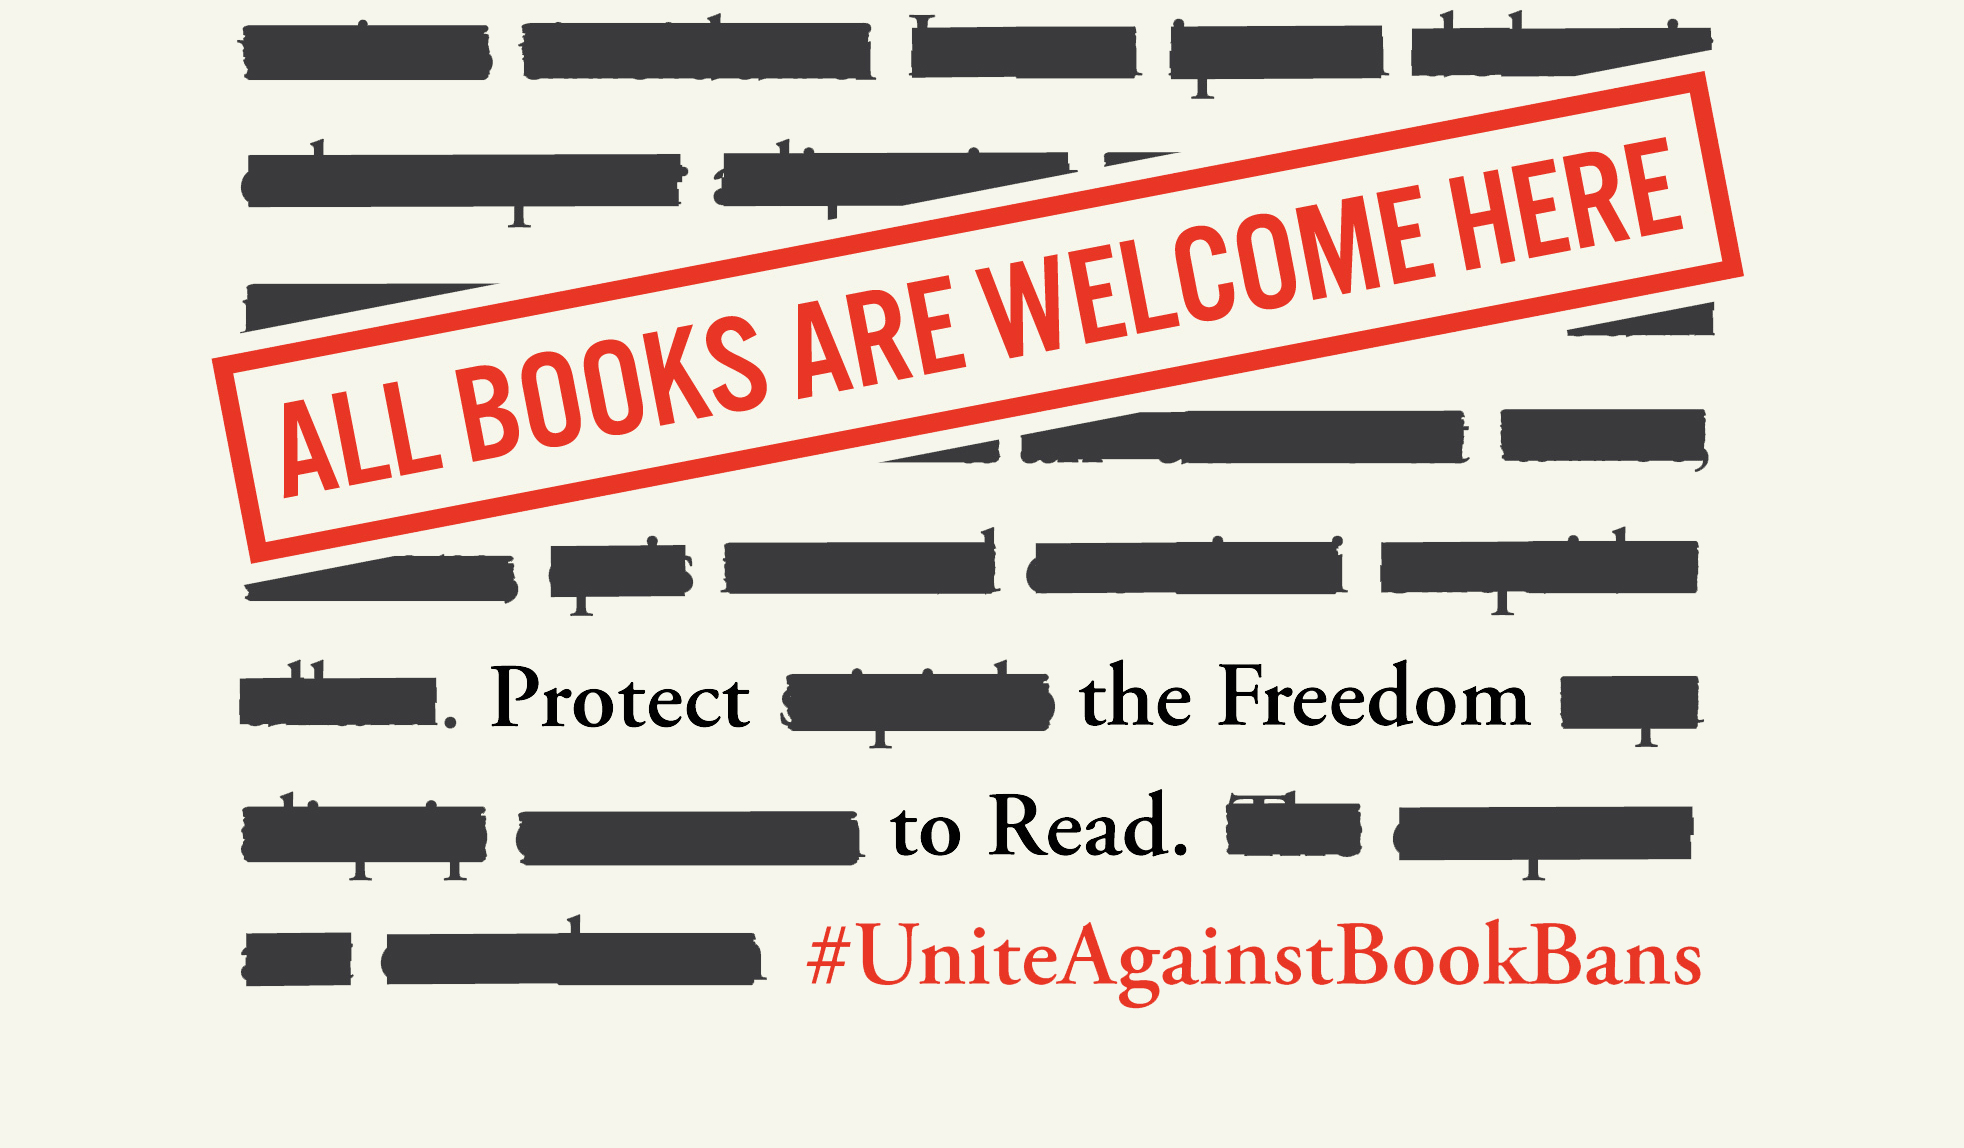 It’s Banned Books Week! Join us for special programs and visit your local library, where all books are welcome.